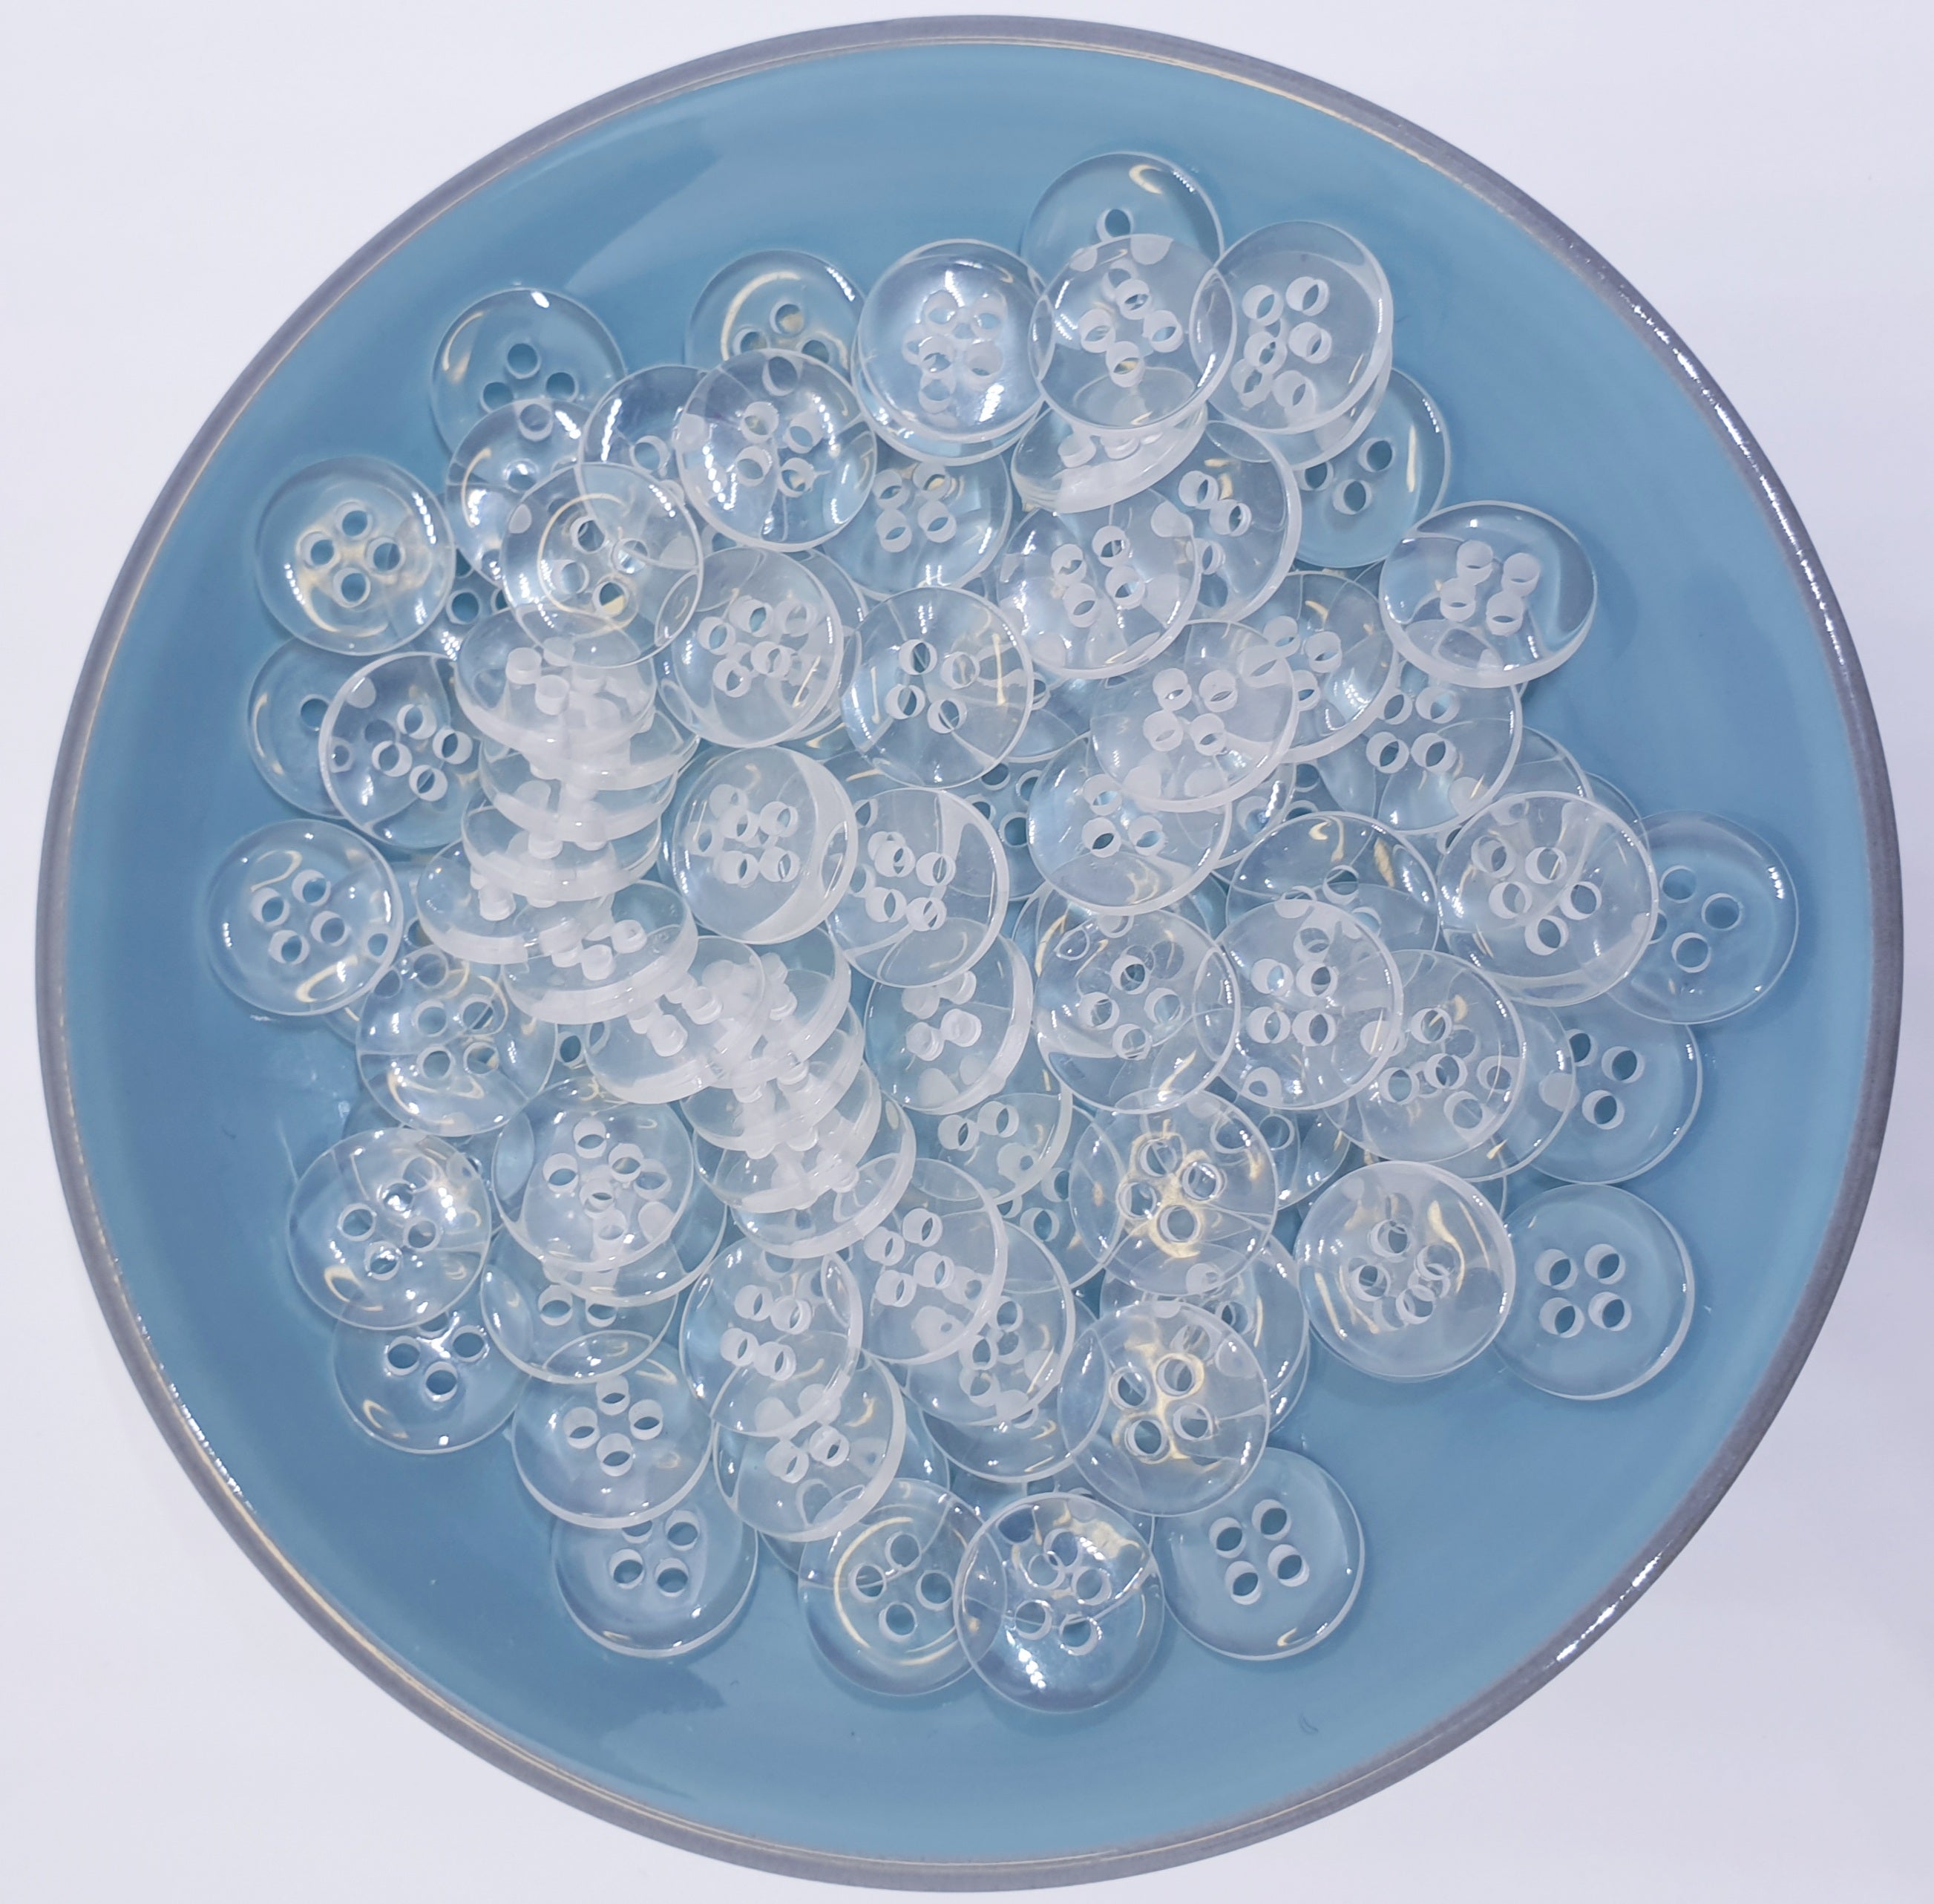 MajorCrafts 100pcs 11.5mm Transparent Clear 4 Holes Small Round Resin Sewing Buttons